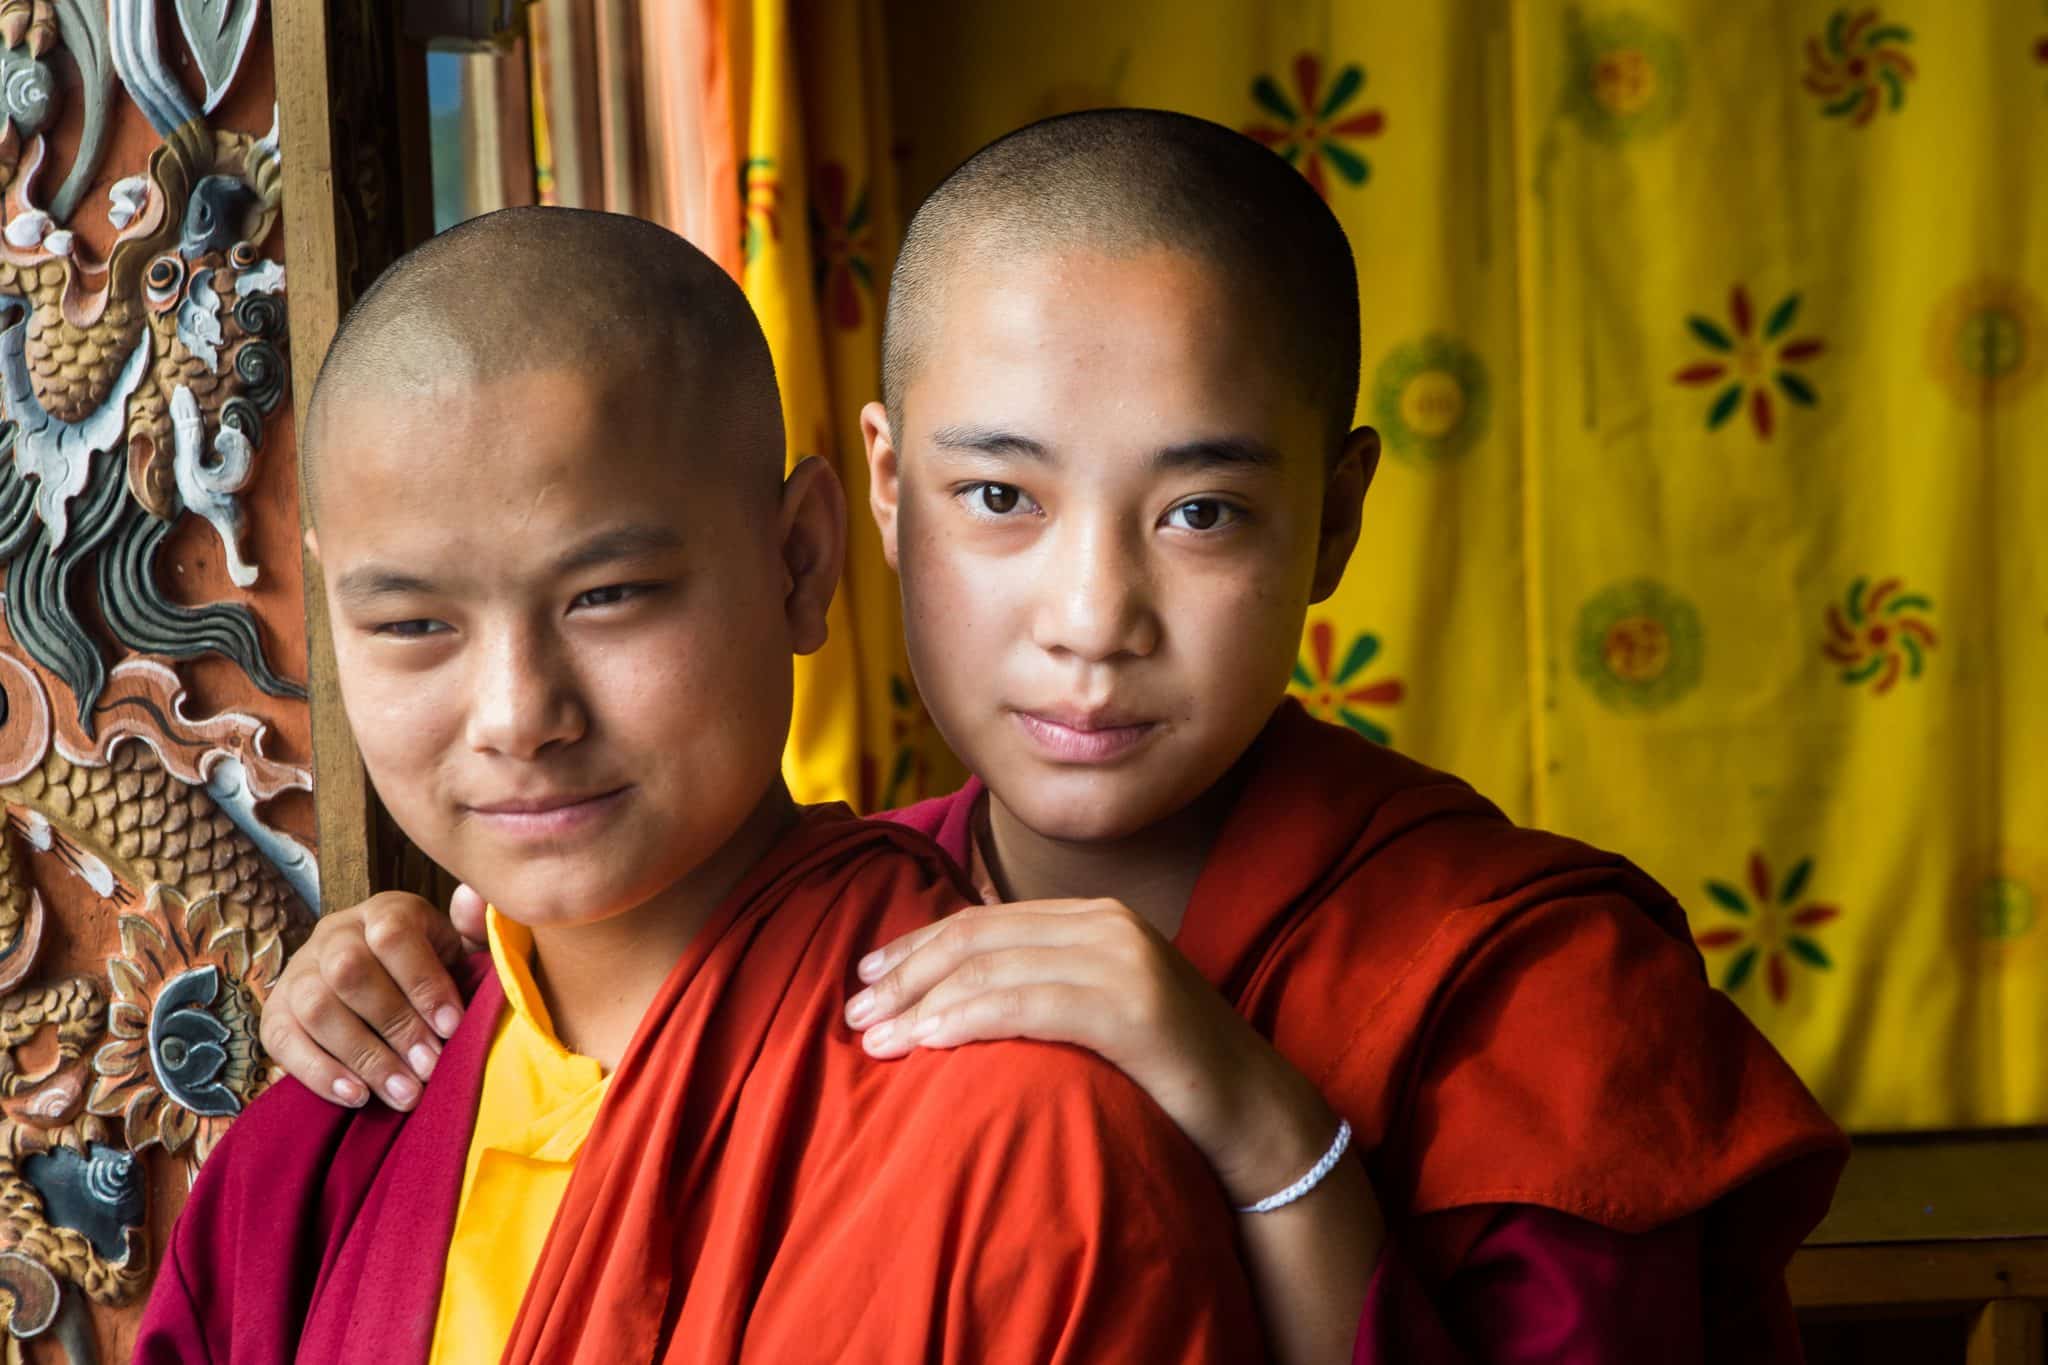 We're traveling to Bhutan - Two young Bhutanese monks by Gray Langur Tours